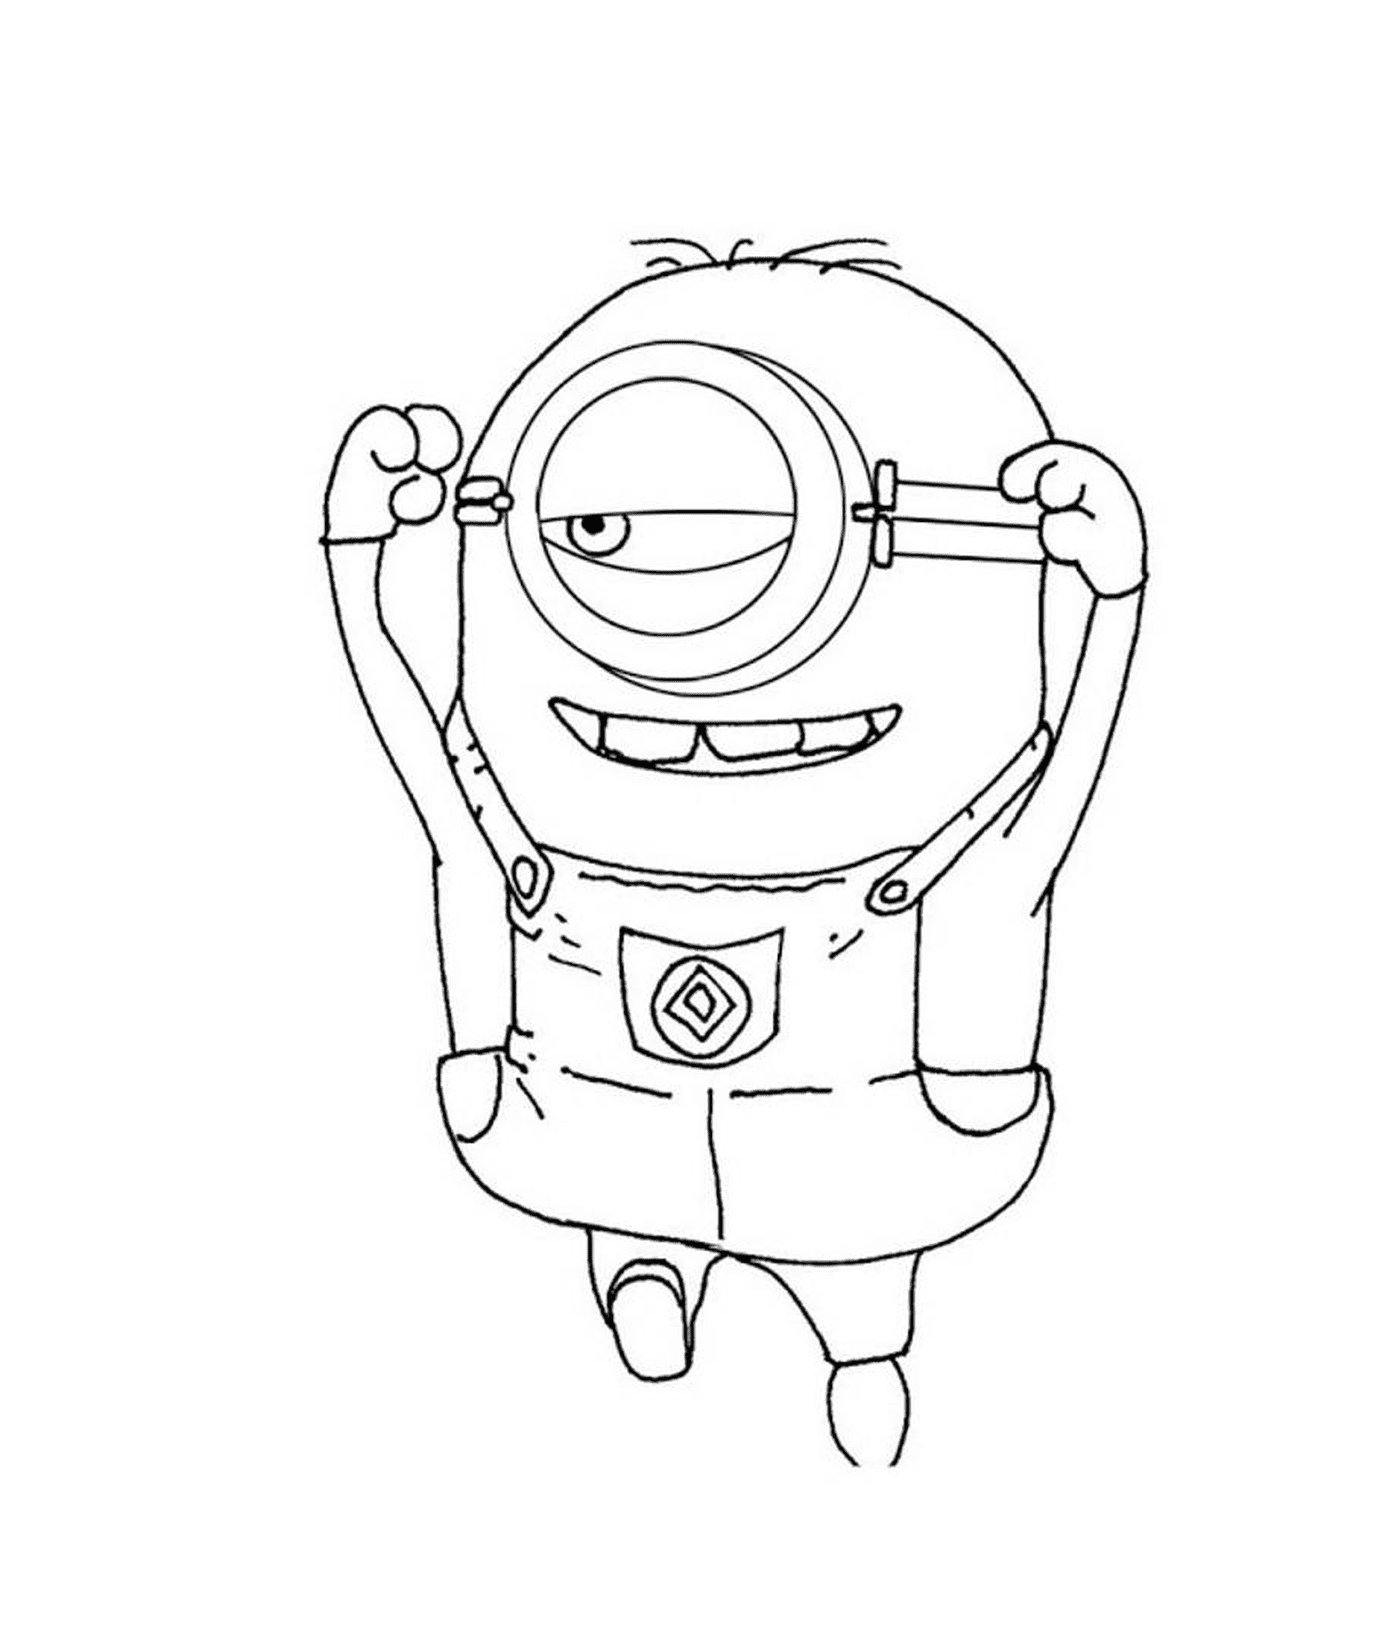  Minion champion, magnifying glass in hand 